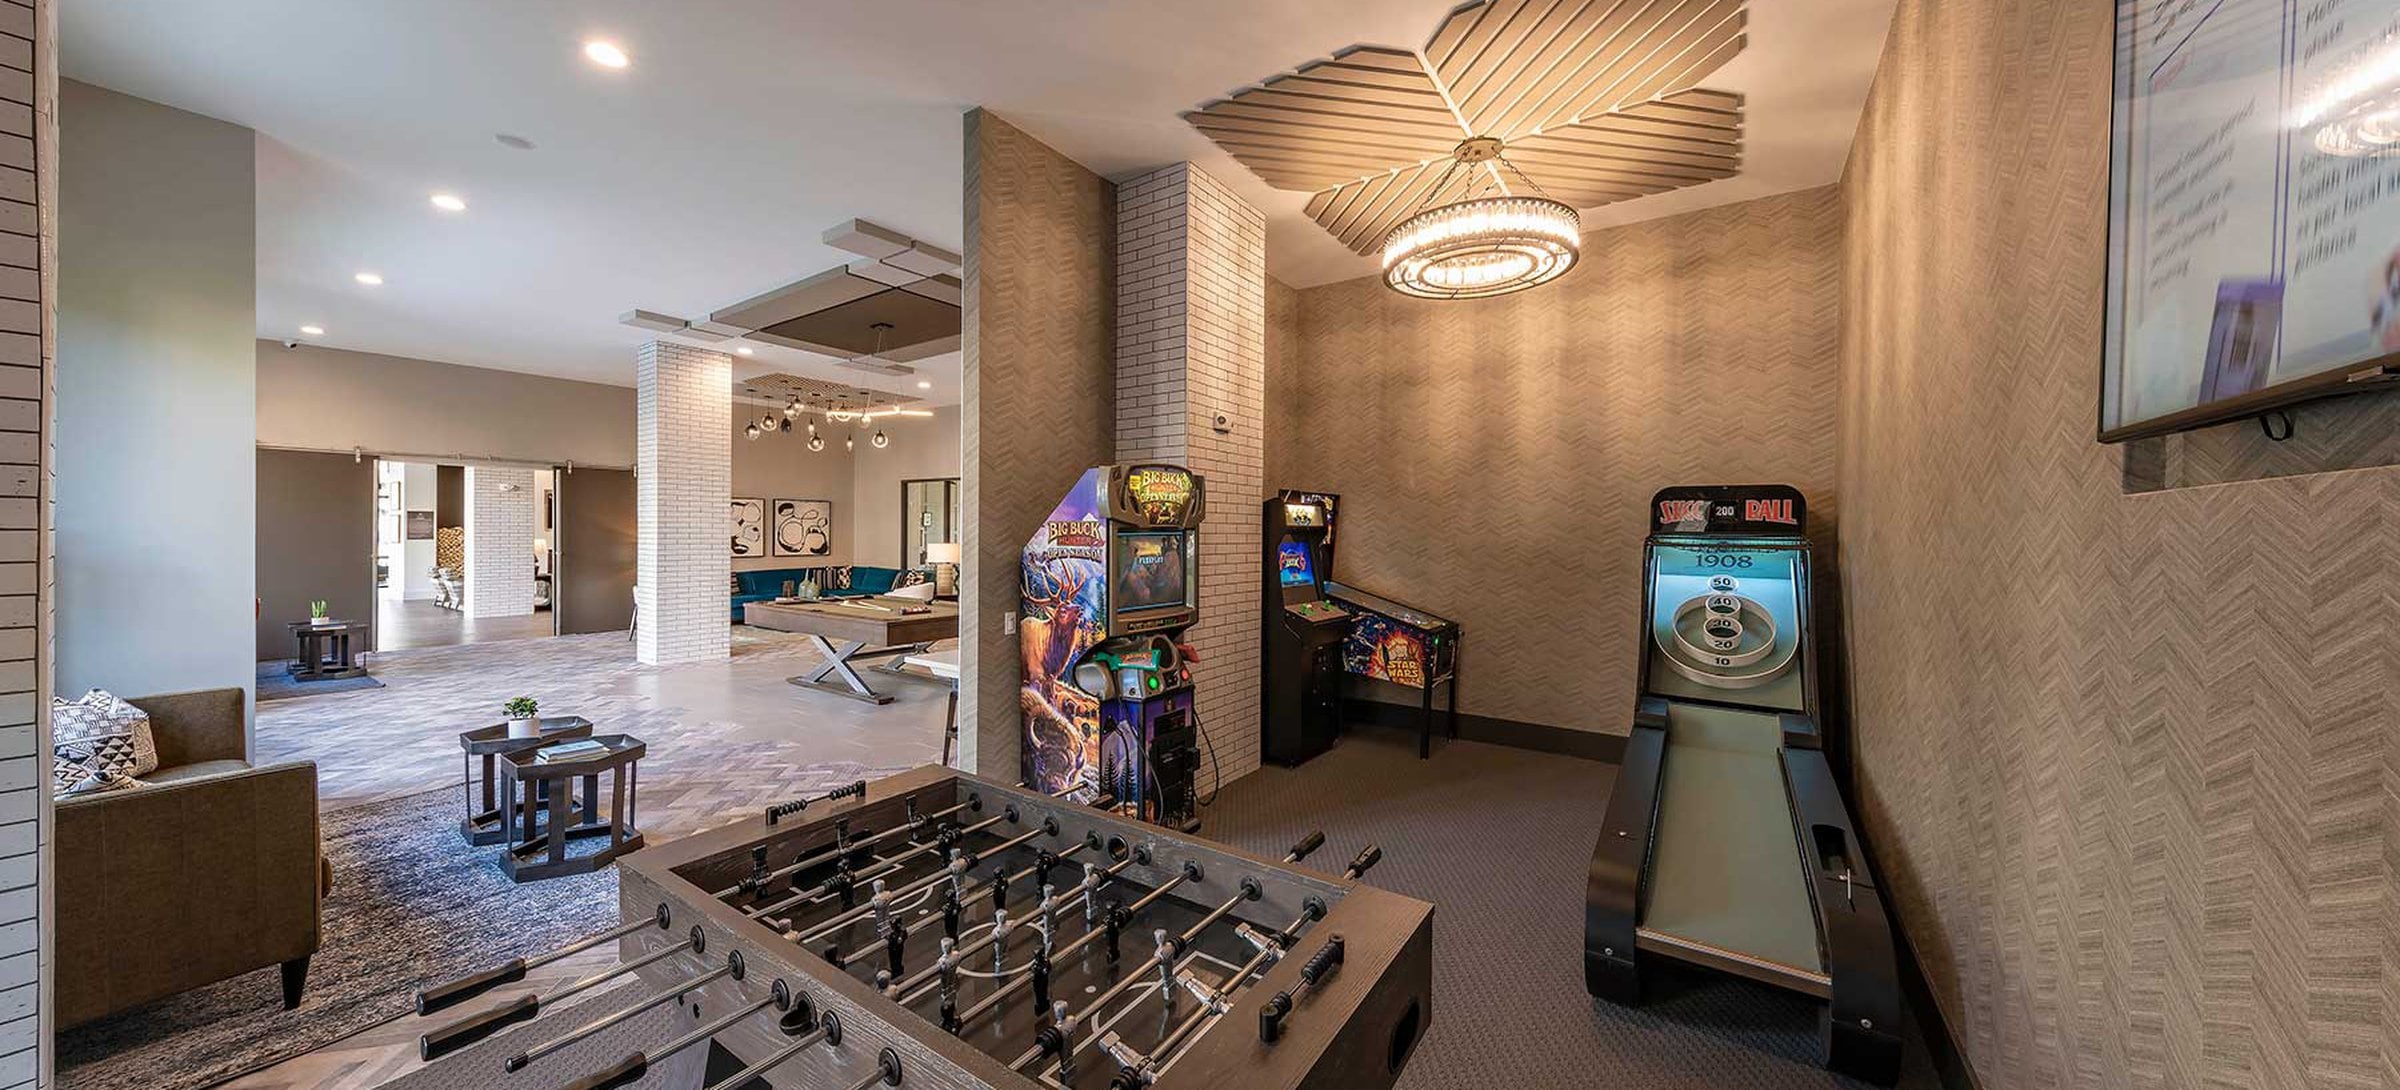 East building resident lounge with foosball table and arcade games